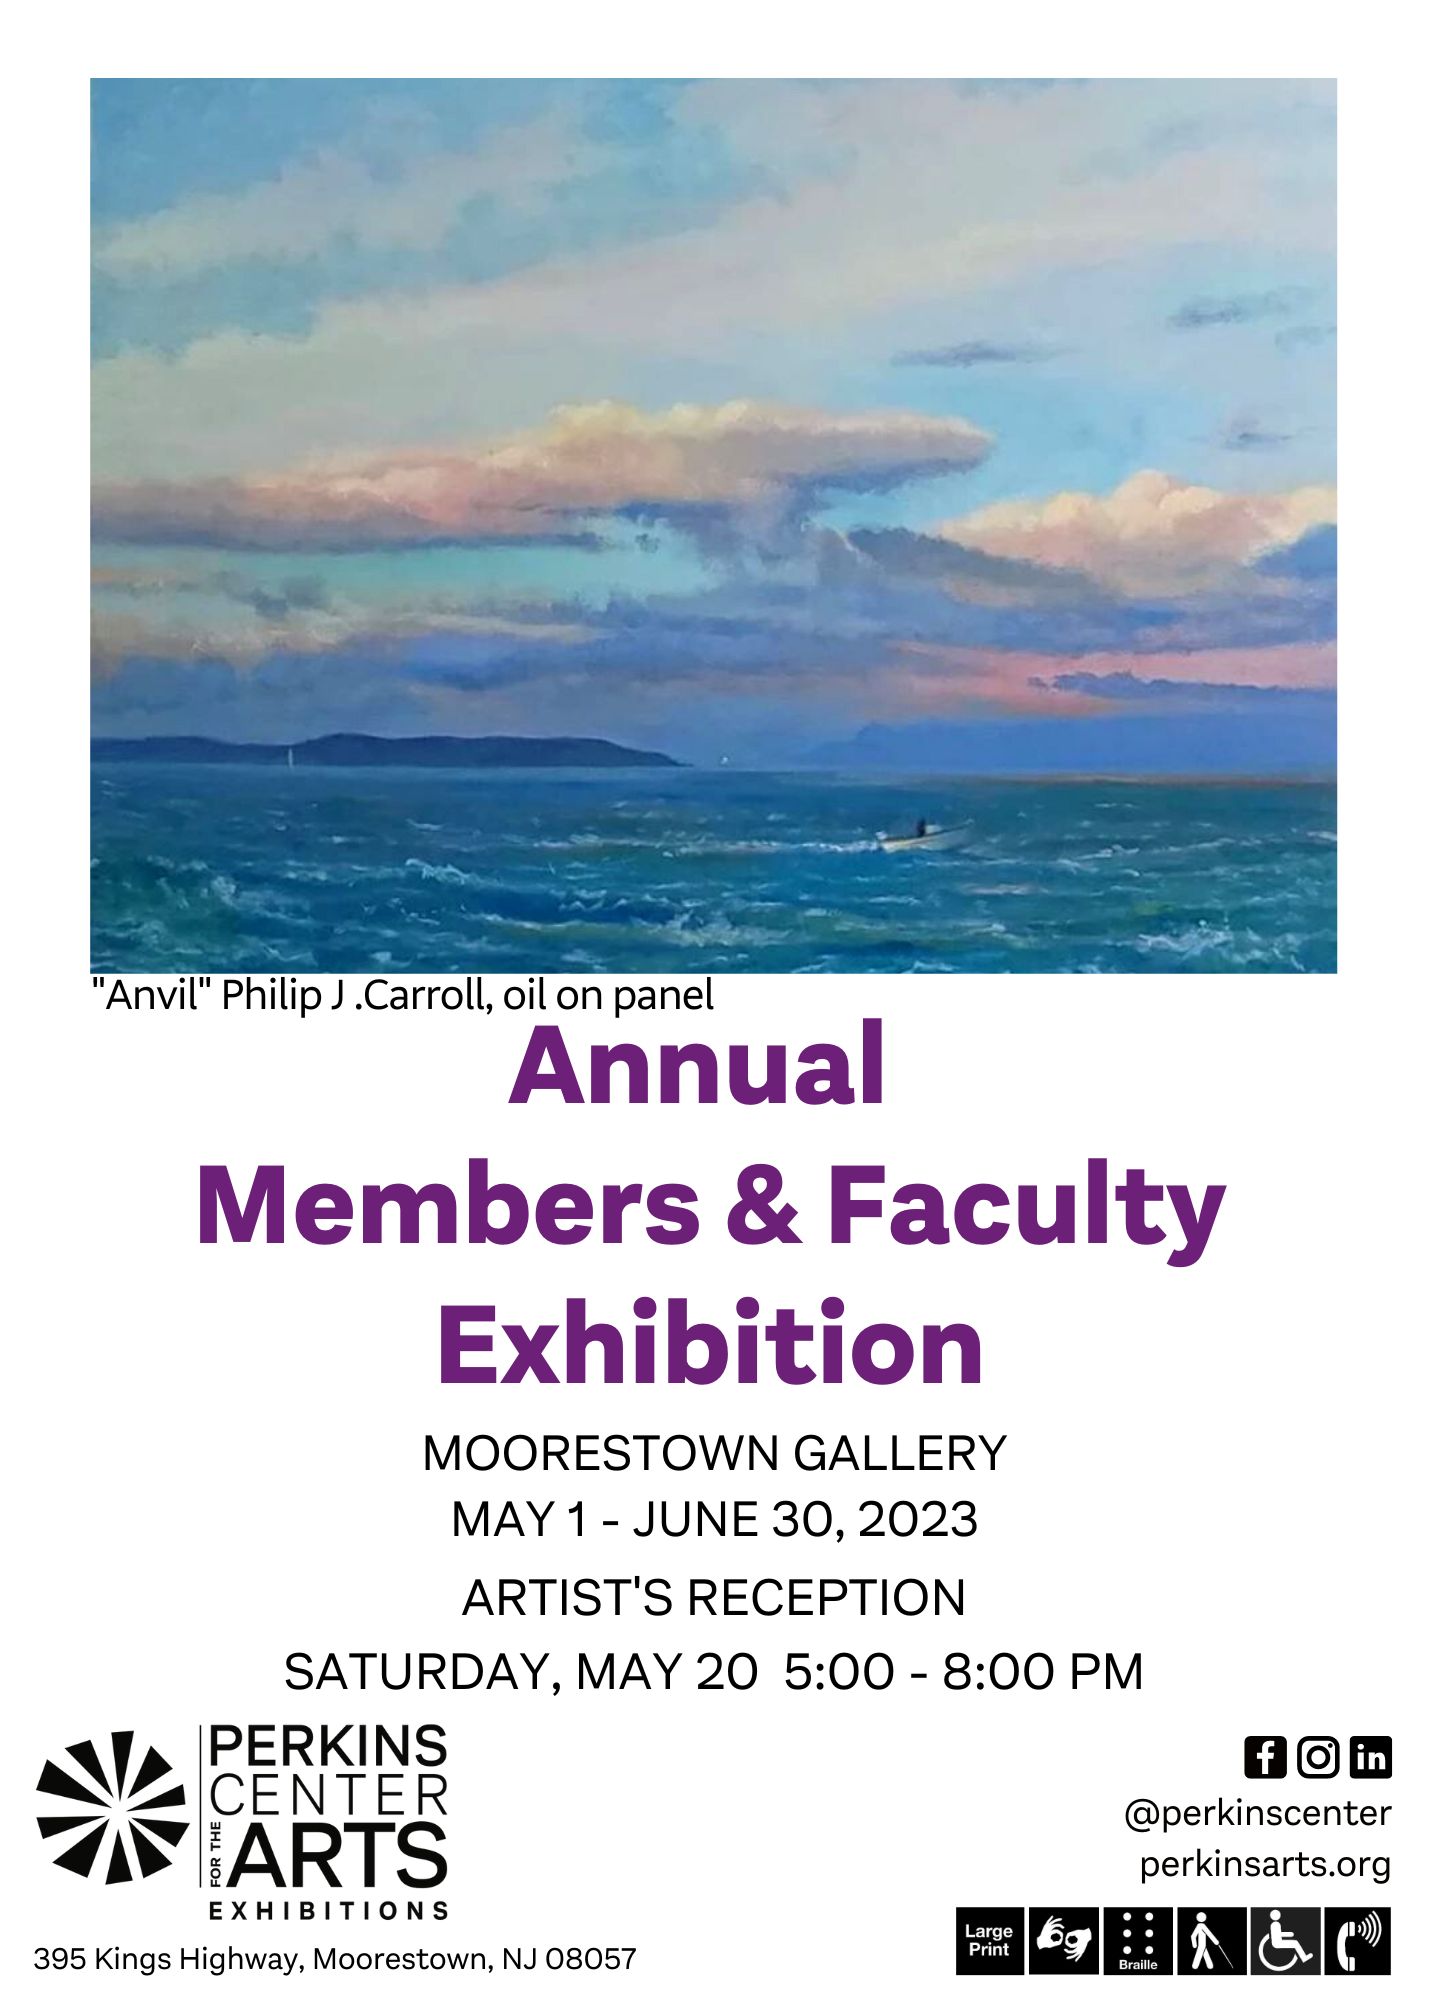 Collingswood: Annual Members & Faculty Exhibition